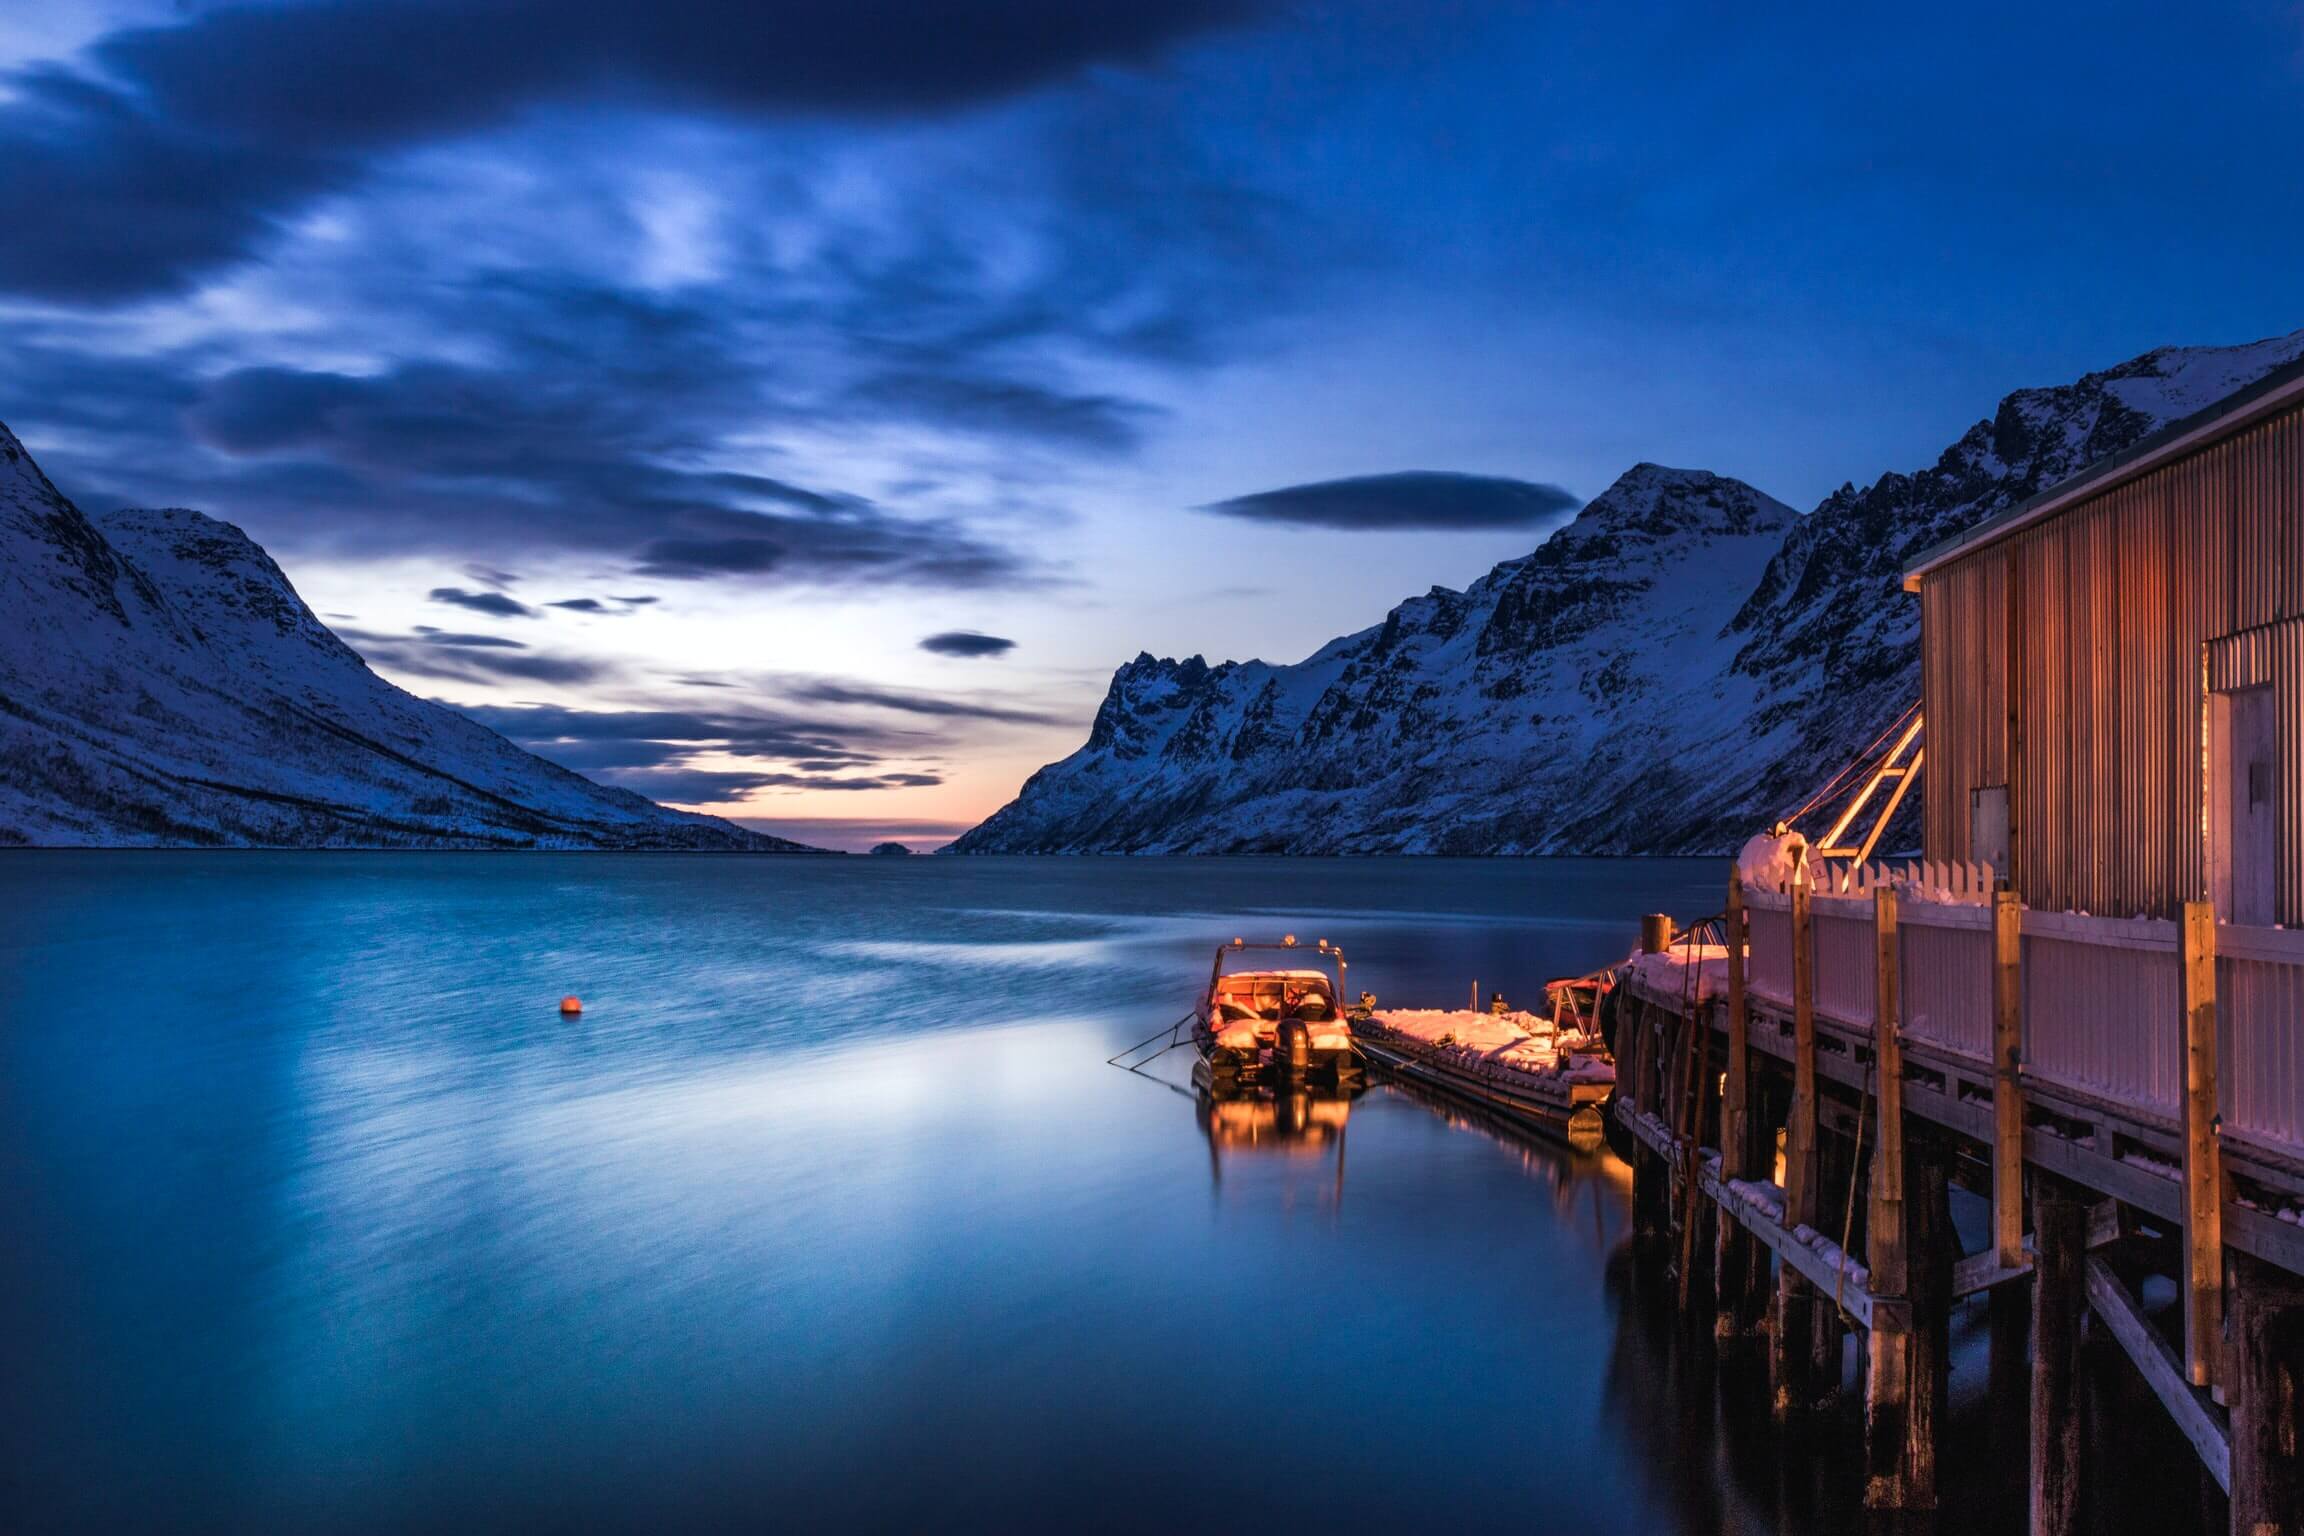 Tromso Harbour - one of the best places to stay in Tromso